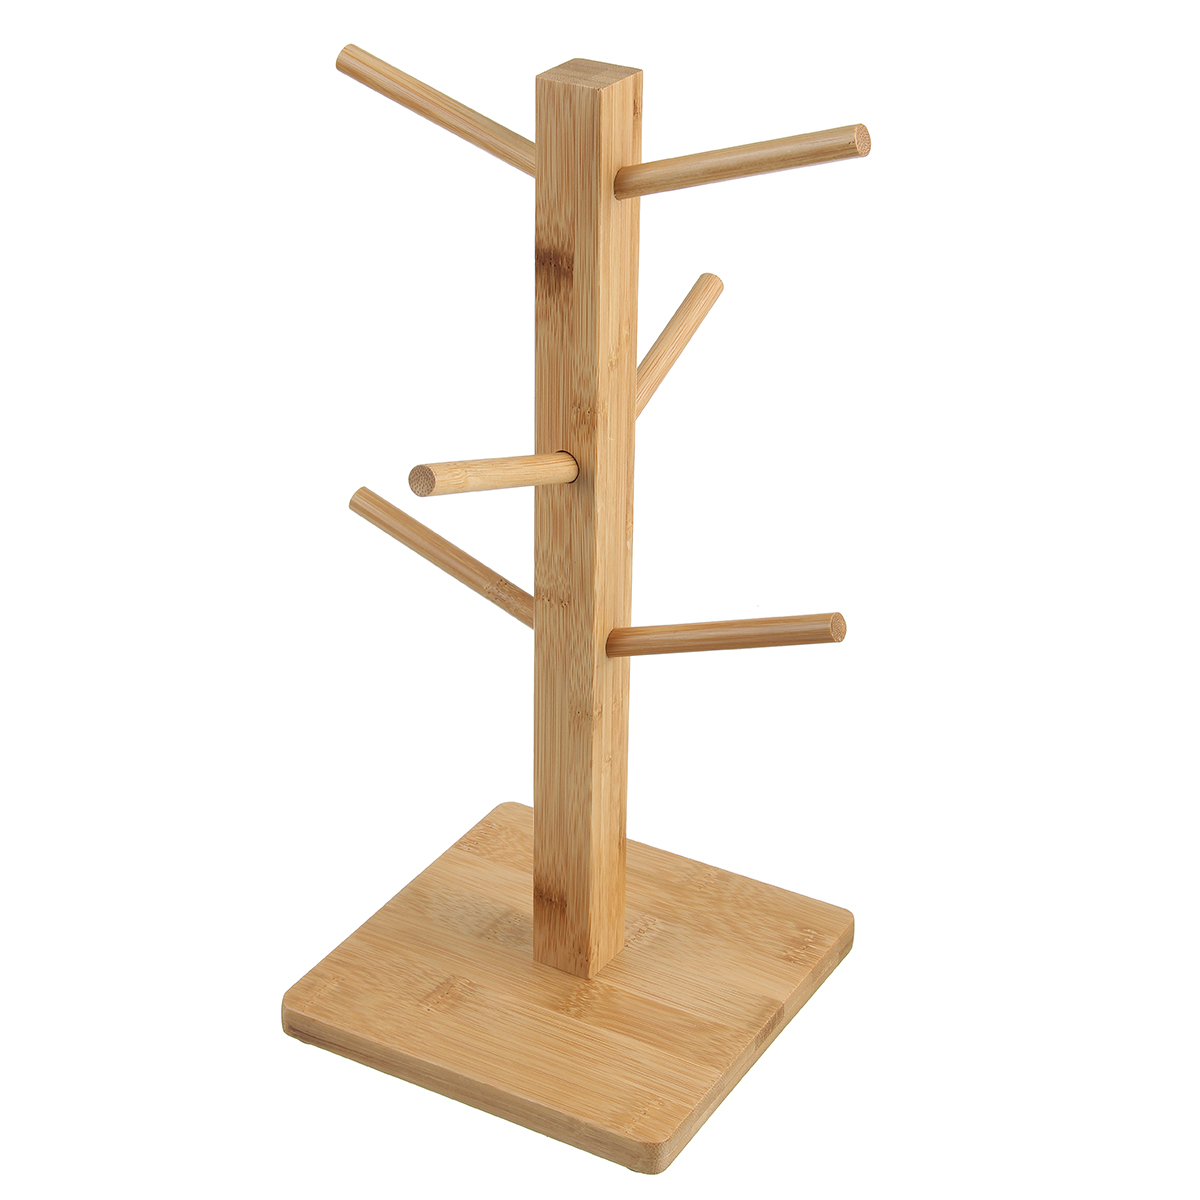 Wooden-Cup-Holder-Teacup-Mug-Drain-Rack-Stand-6-Cups-Drain-Cup-Hanging-Stand-Coffee-Cup-Display-Stan-1777089-10